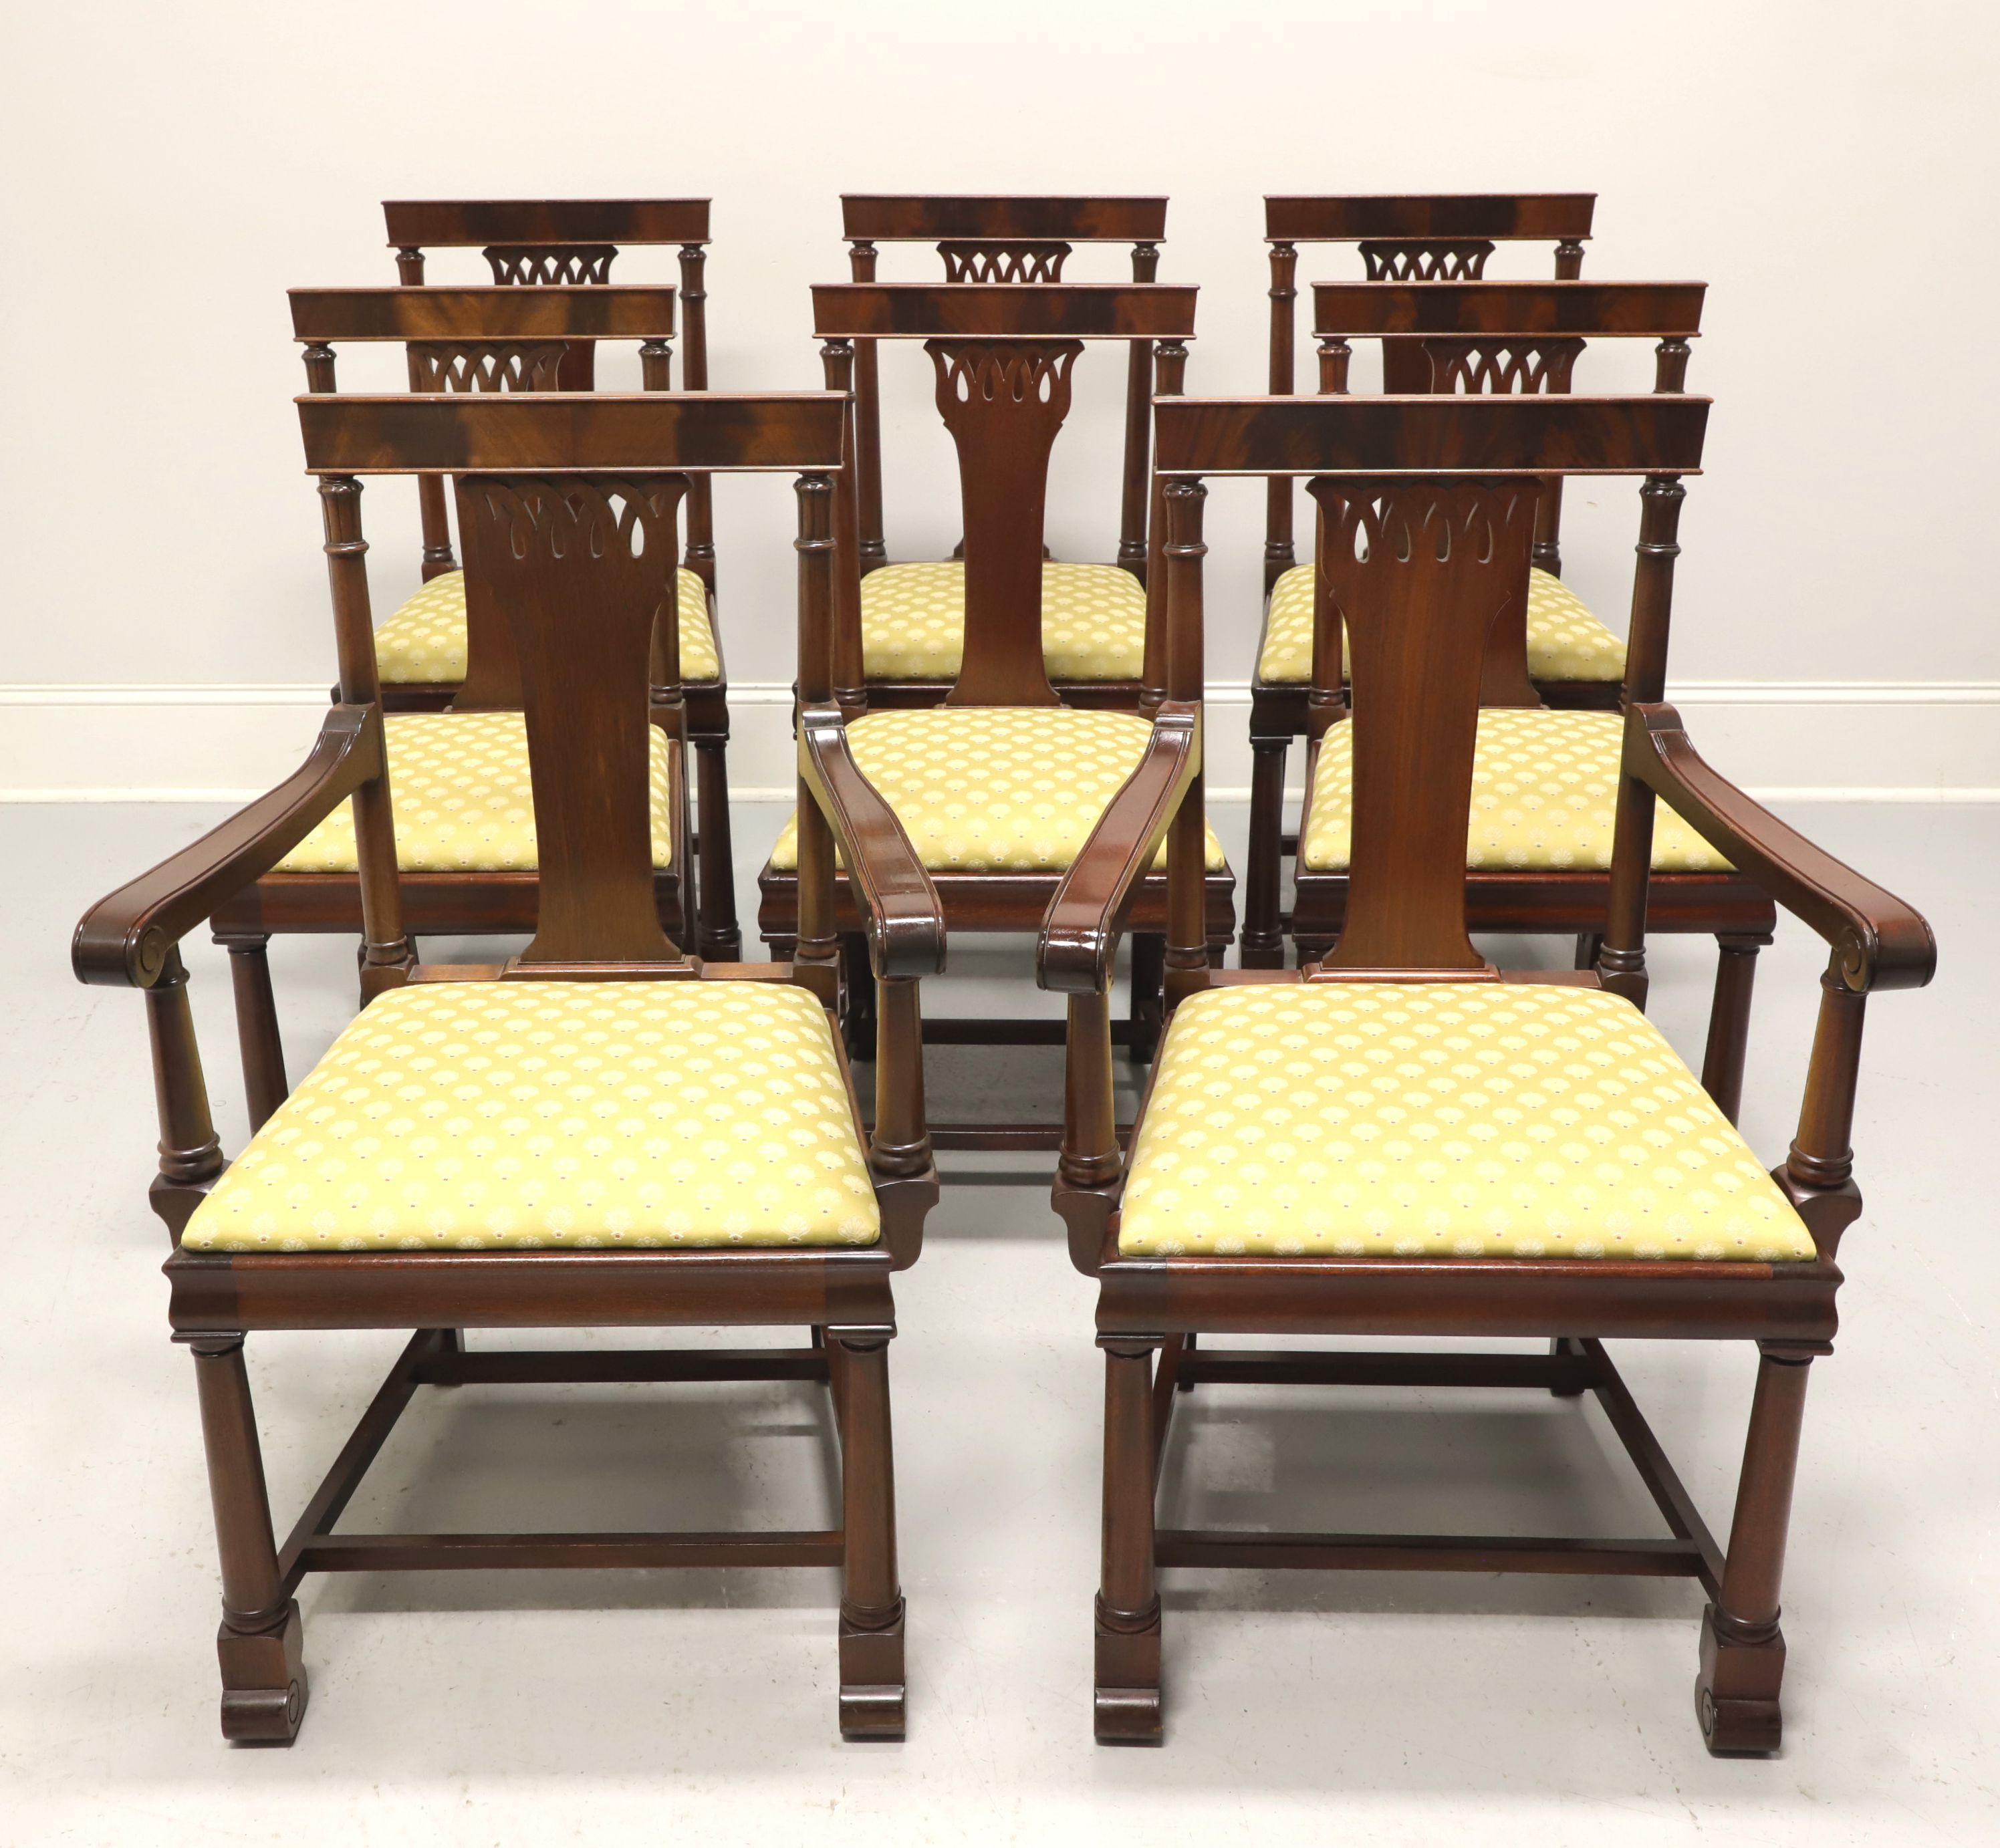 A set of eight 1940's era Empire style dining chairs, unbranded. Mahogany with flame mahogany barback crestrail, carved backrest, yellow gold color fabric upholstered seat, stretcher base, and doric column like seat back frame, arm supports & front